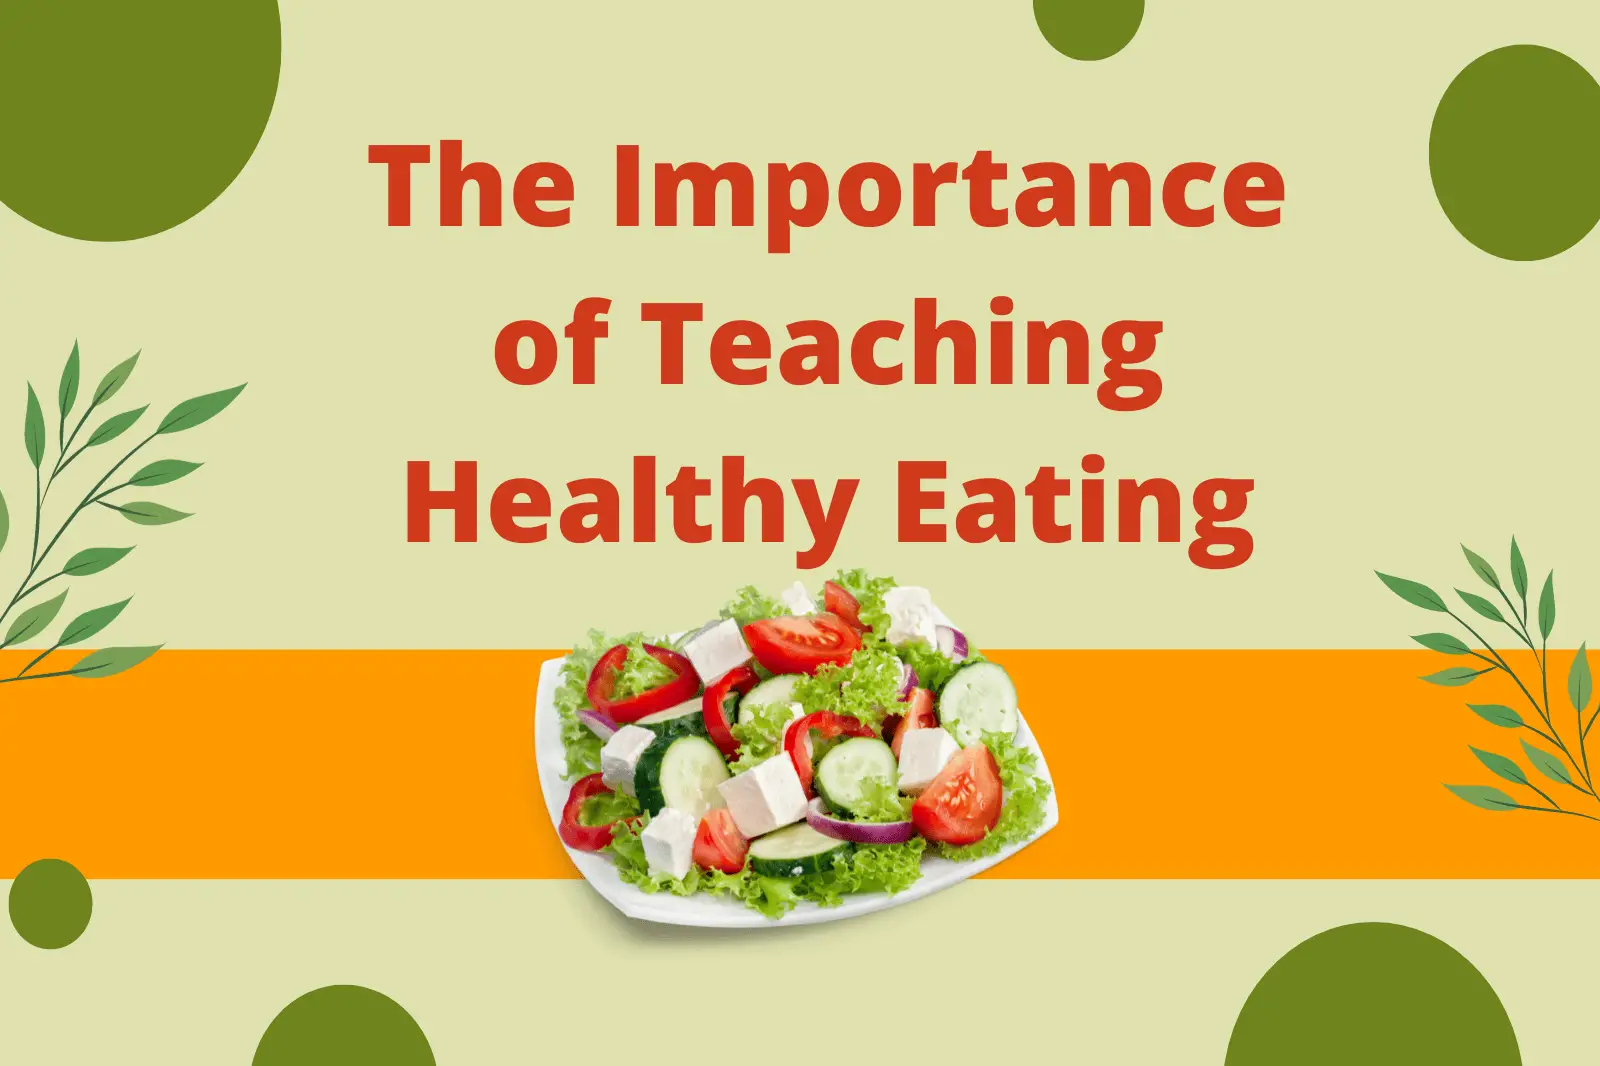 The Importance of Teaching Healthy Eating